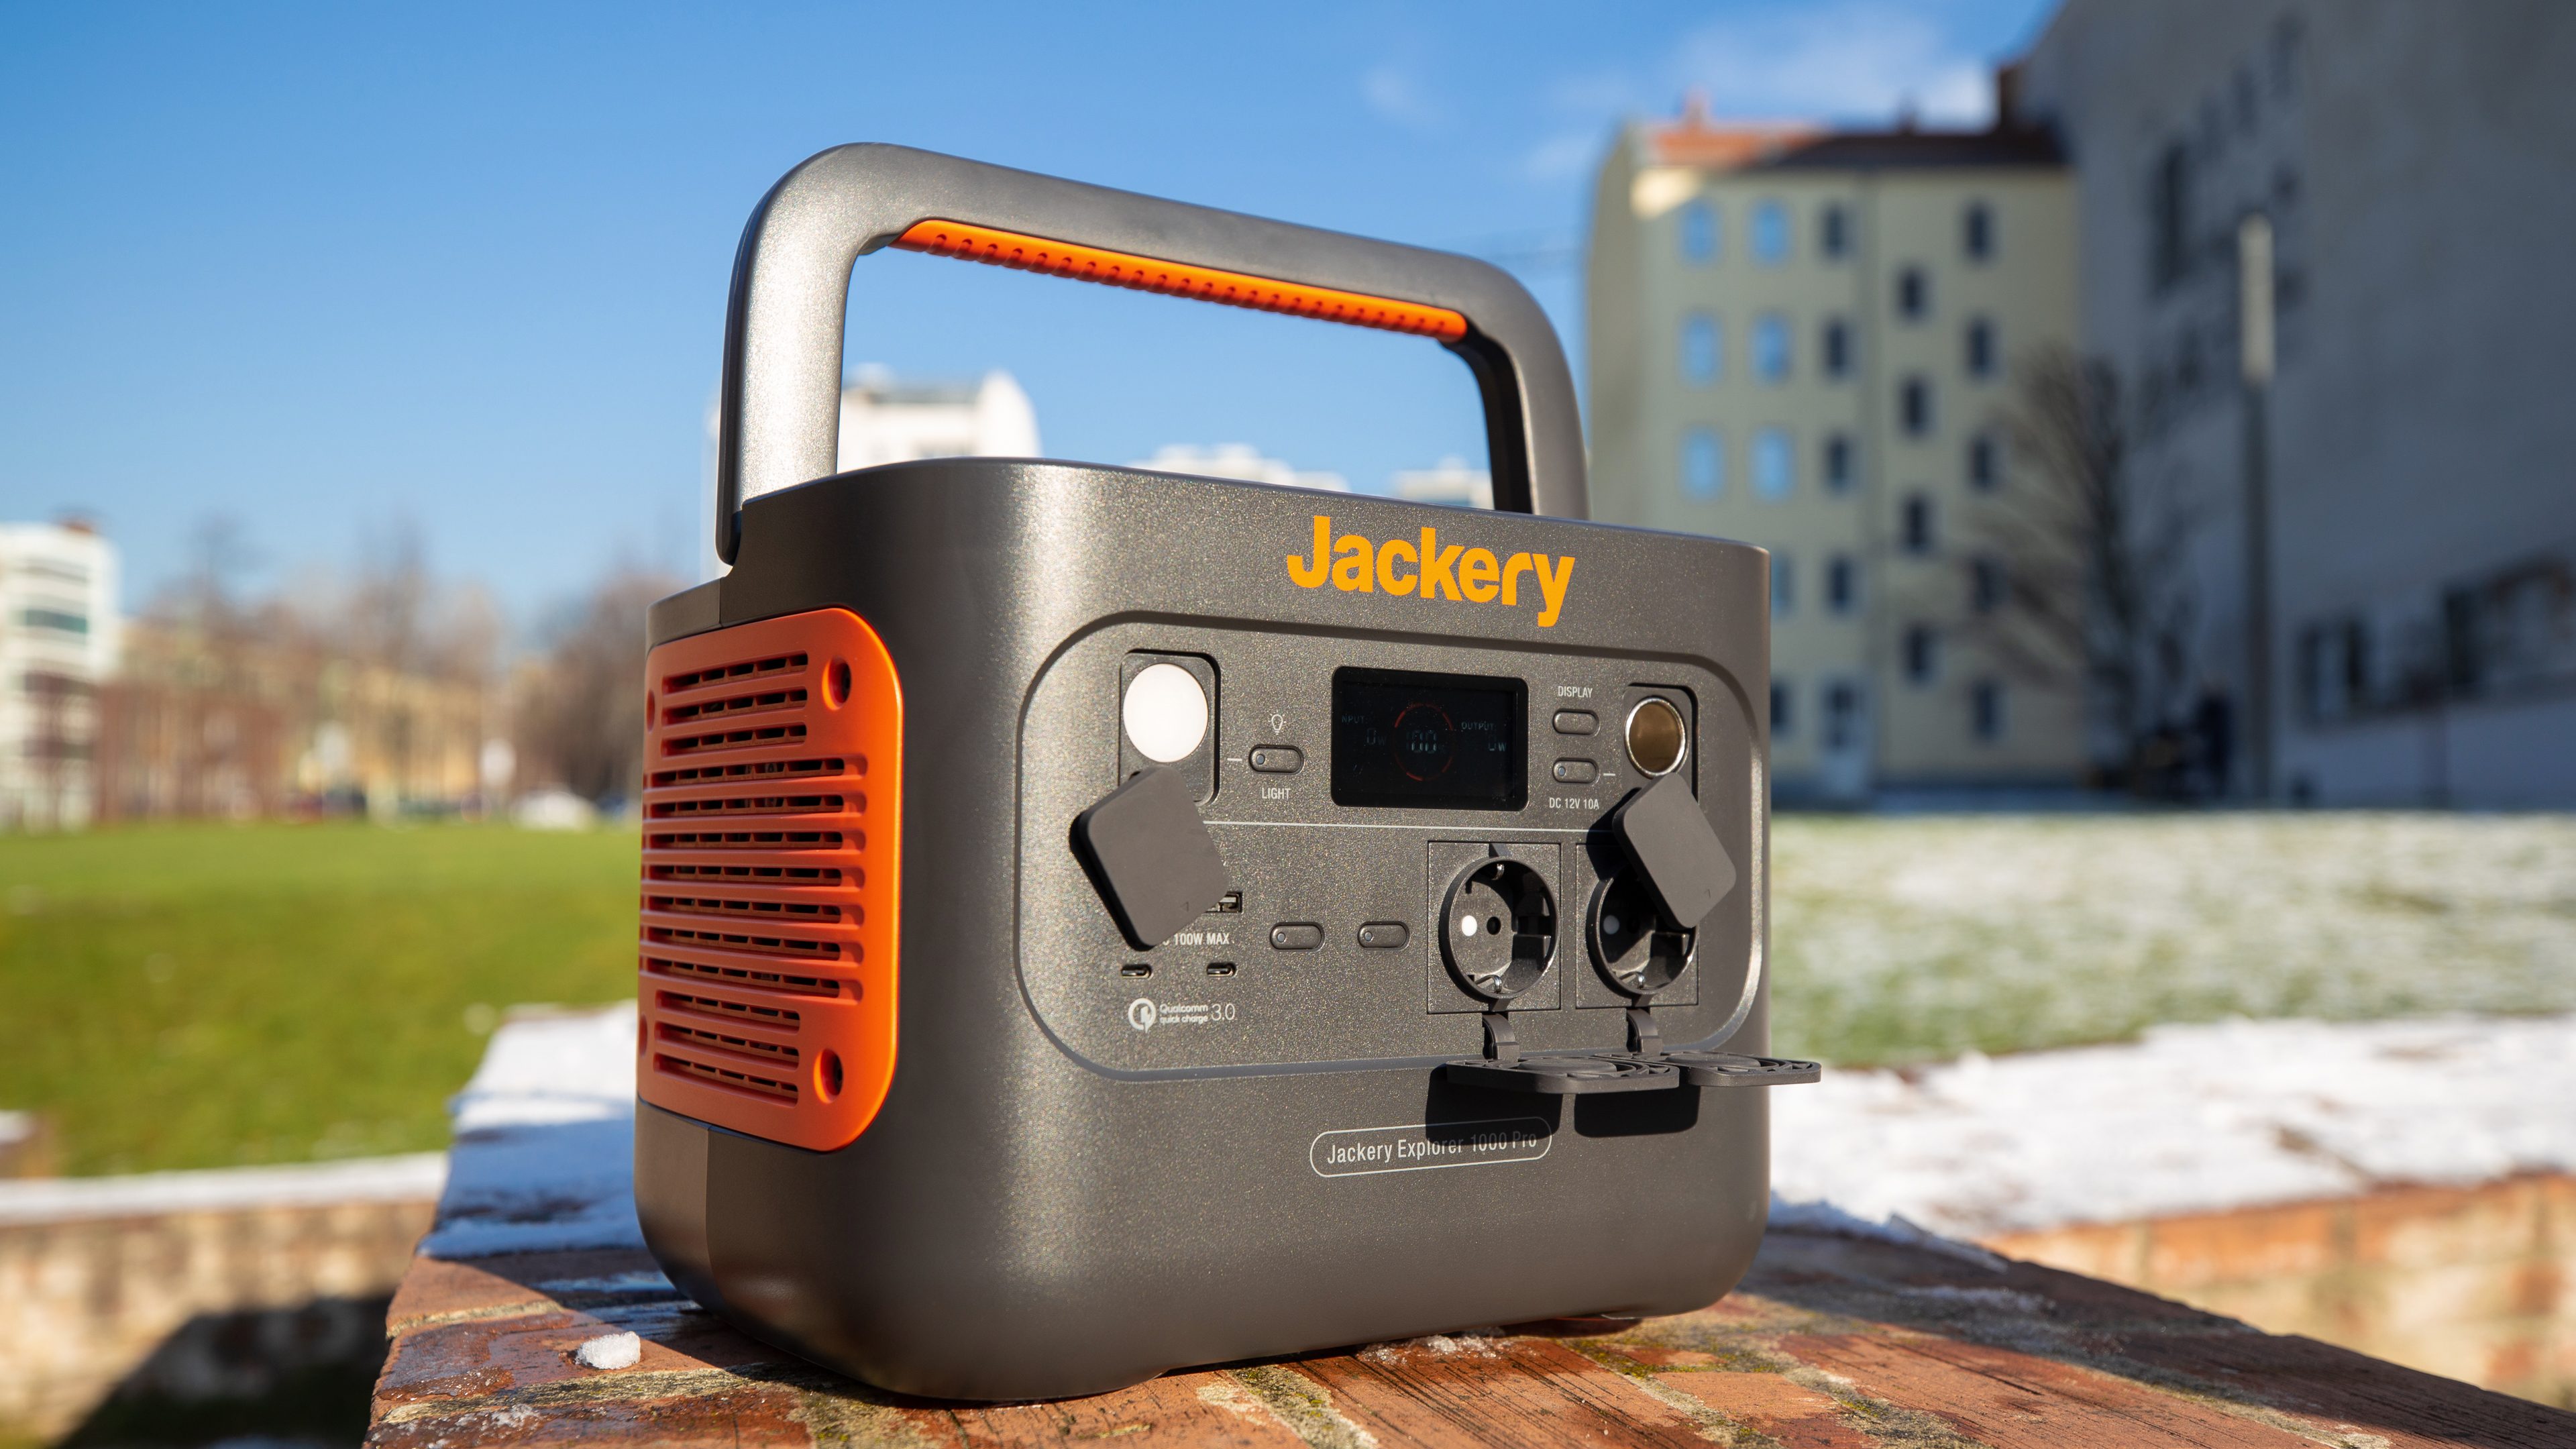 Jackery 1000 Portable Power Station - What You Should Know Before Buying